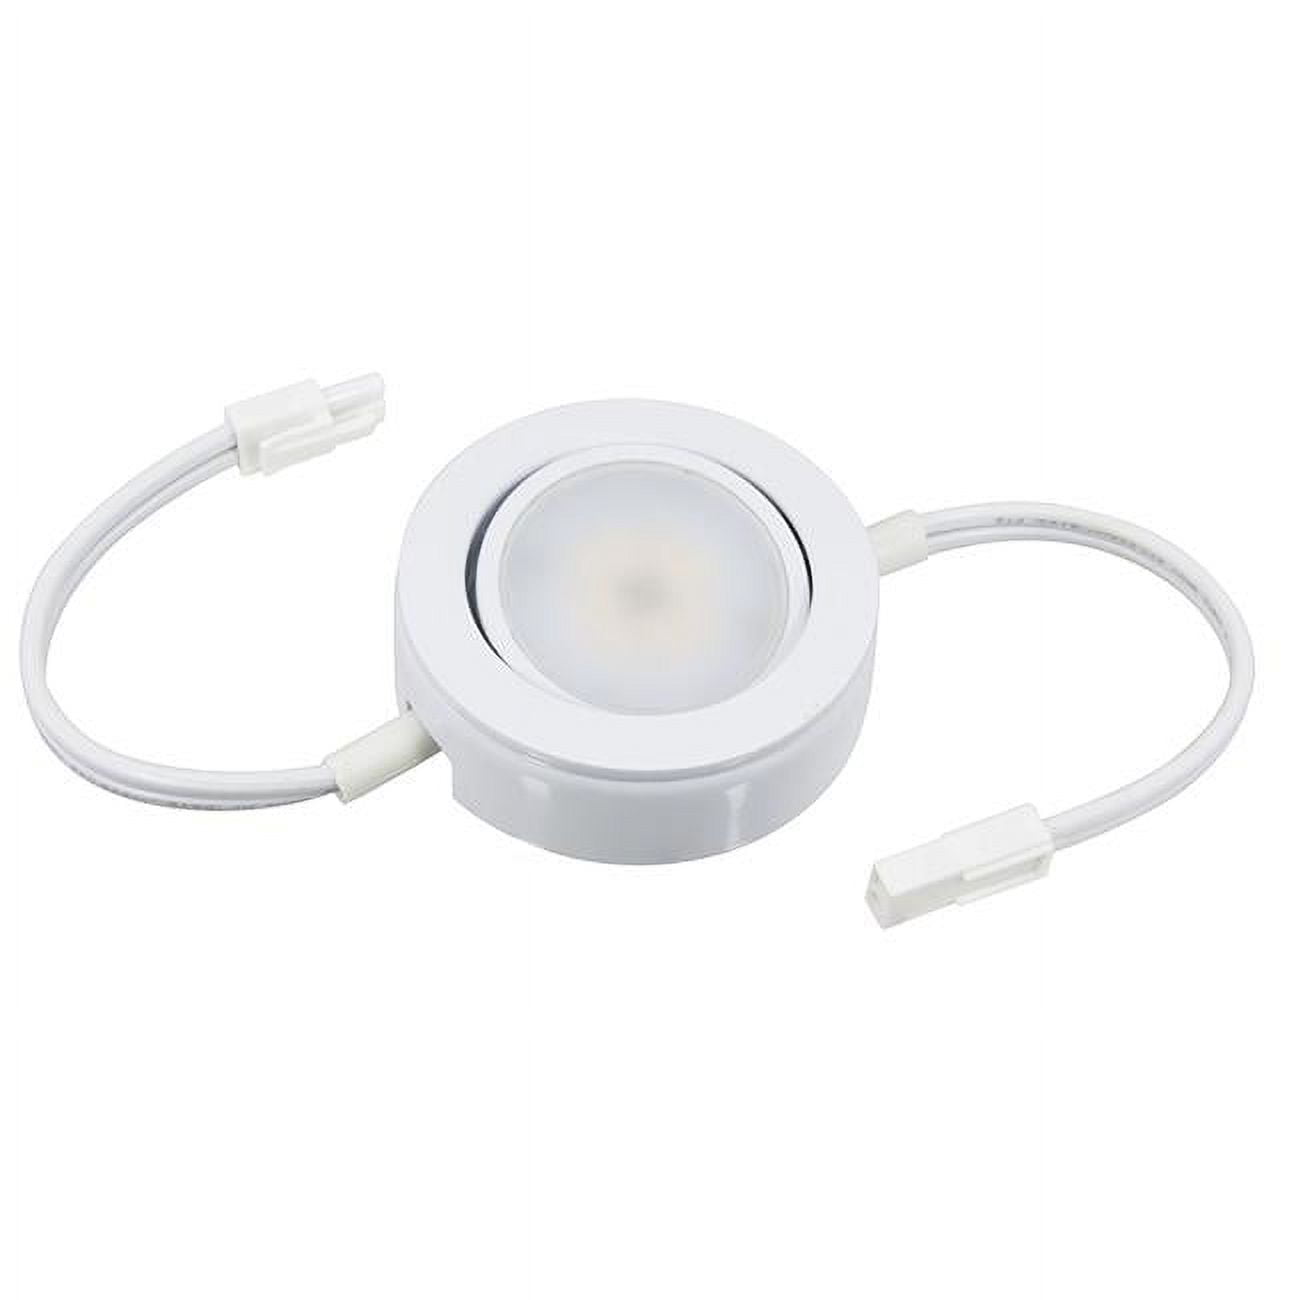 Picture of AmericanLighting MVP-1-WH-B Dimmable LED Puck Light with 6 in. Lead Wire, 6 in. Tail Wire & Mounting Screws, 120 V AC, 4 watt - White